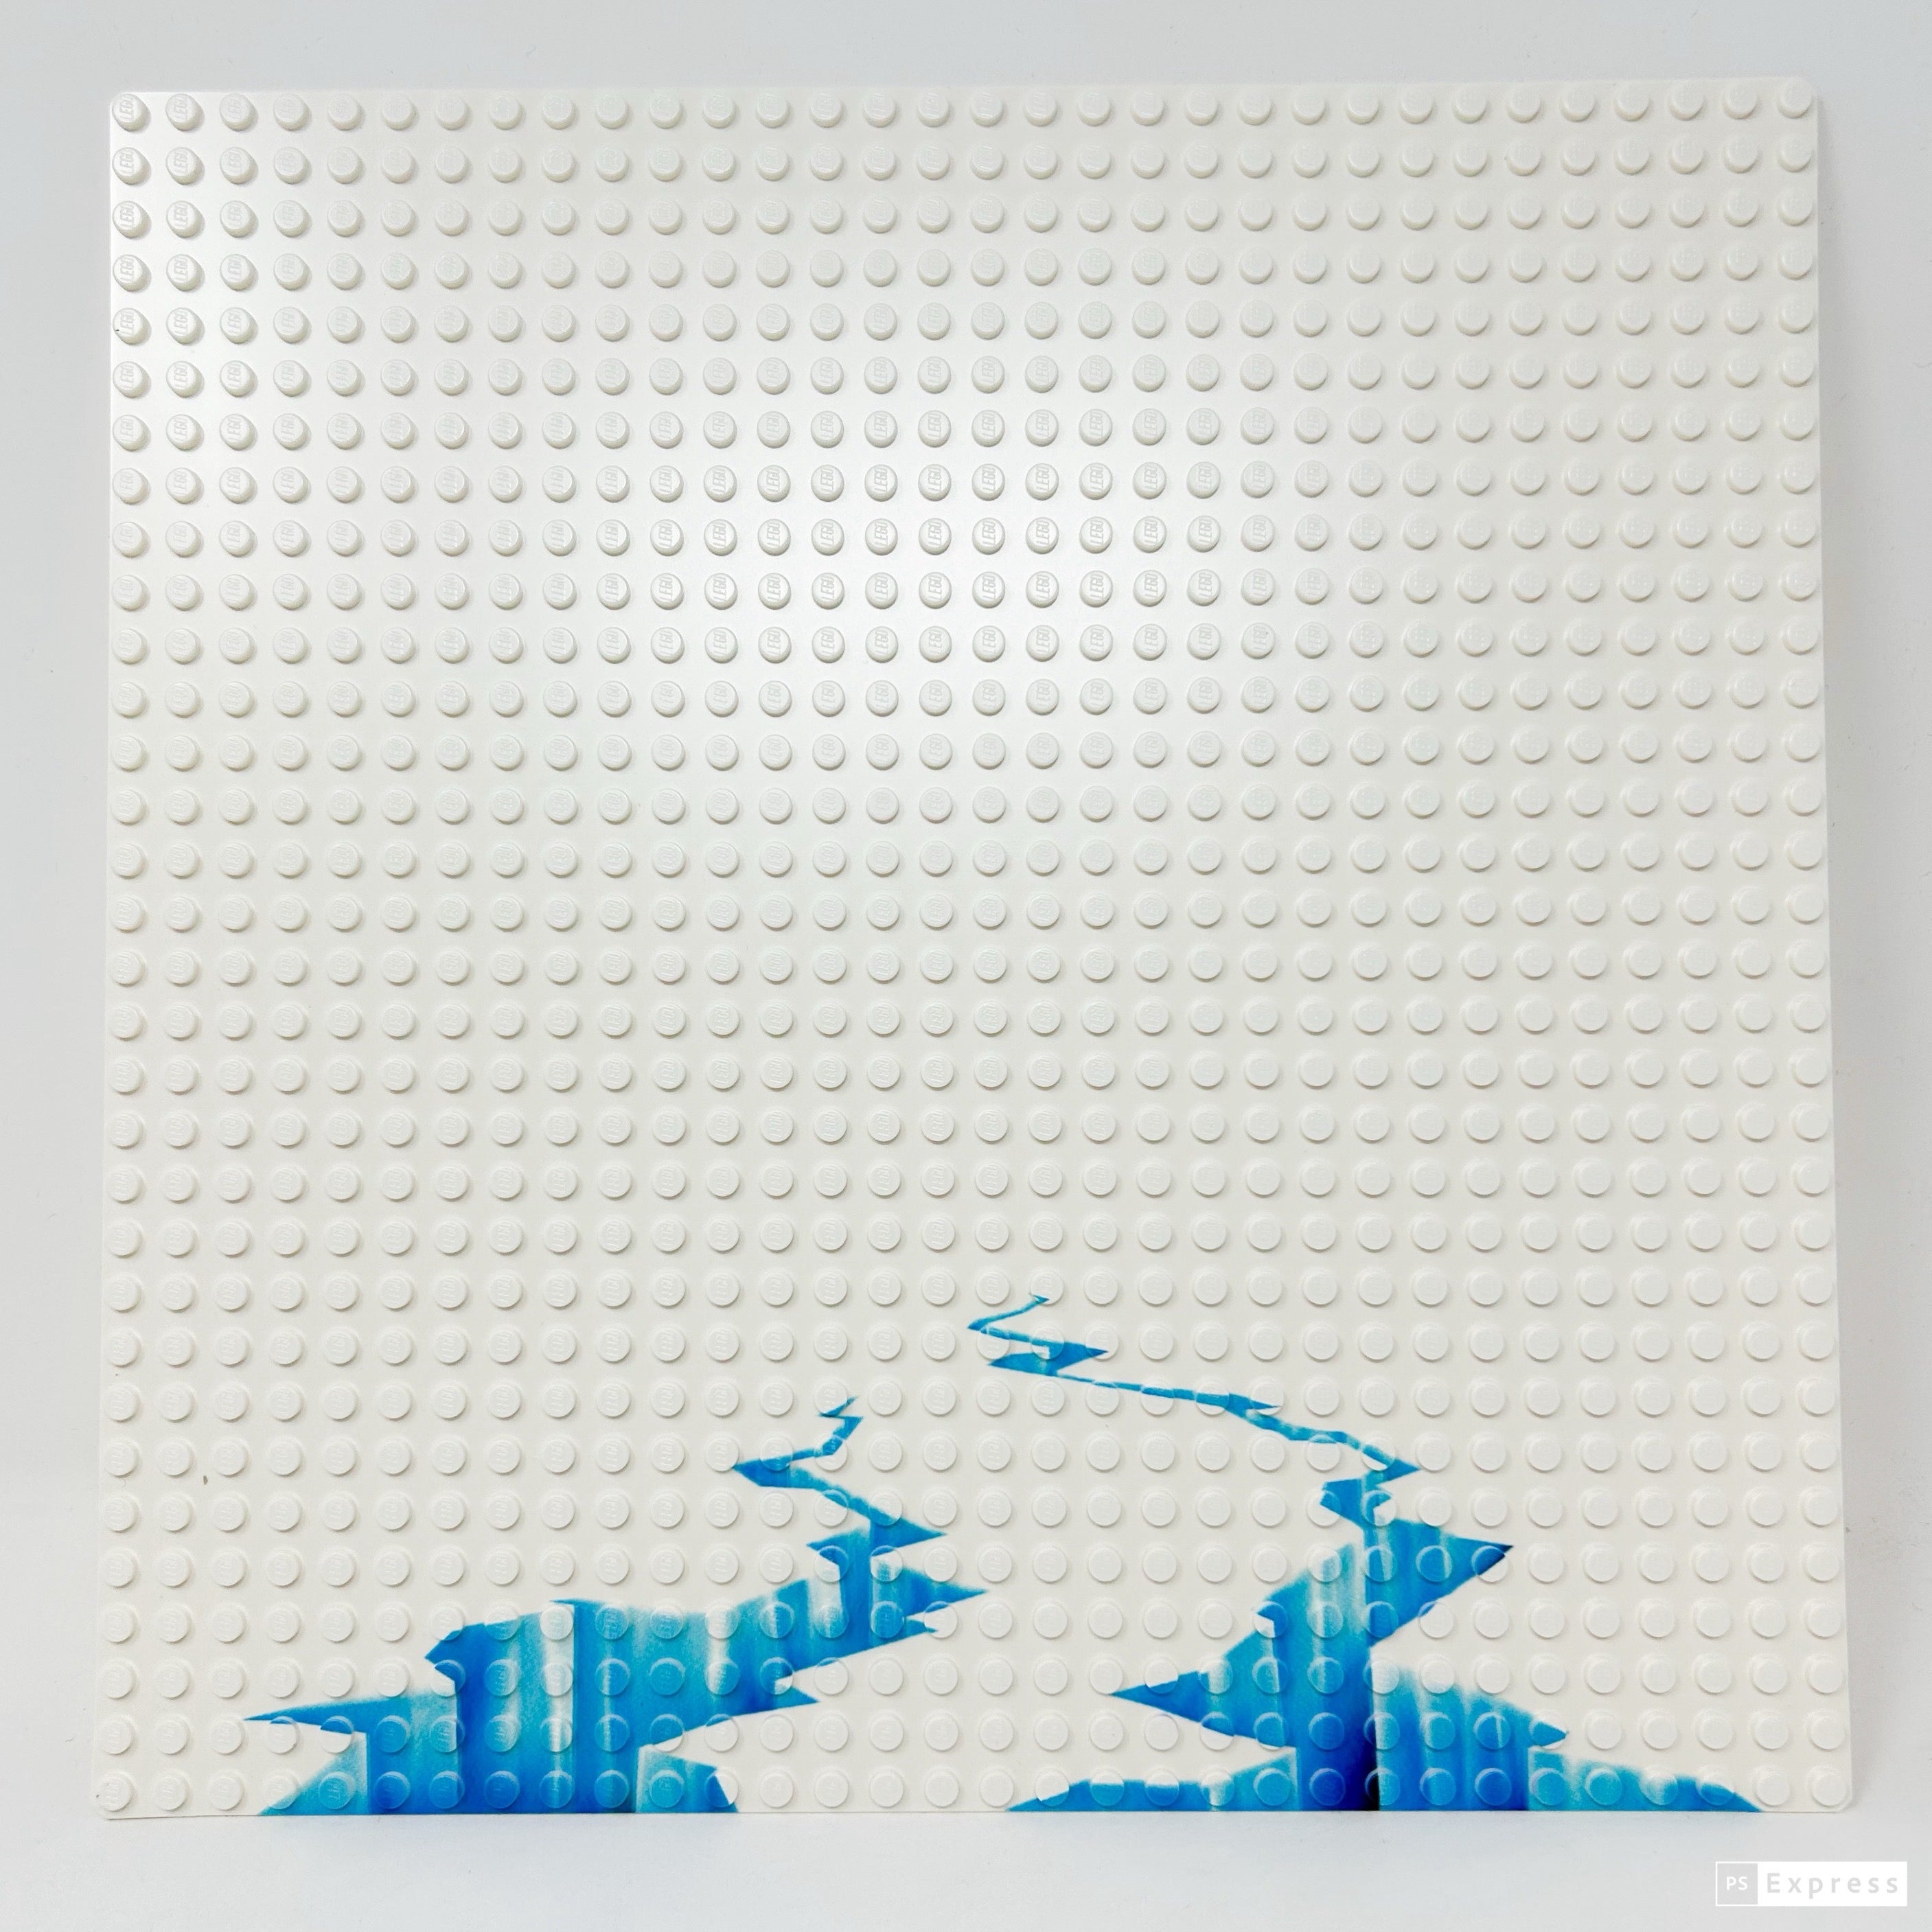 Arctic Cracked Ice / Glacier Baseplate made with LEGO baseplate - B3 Customs